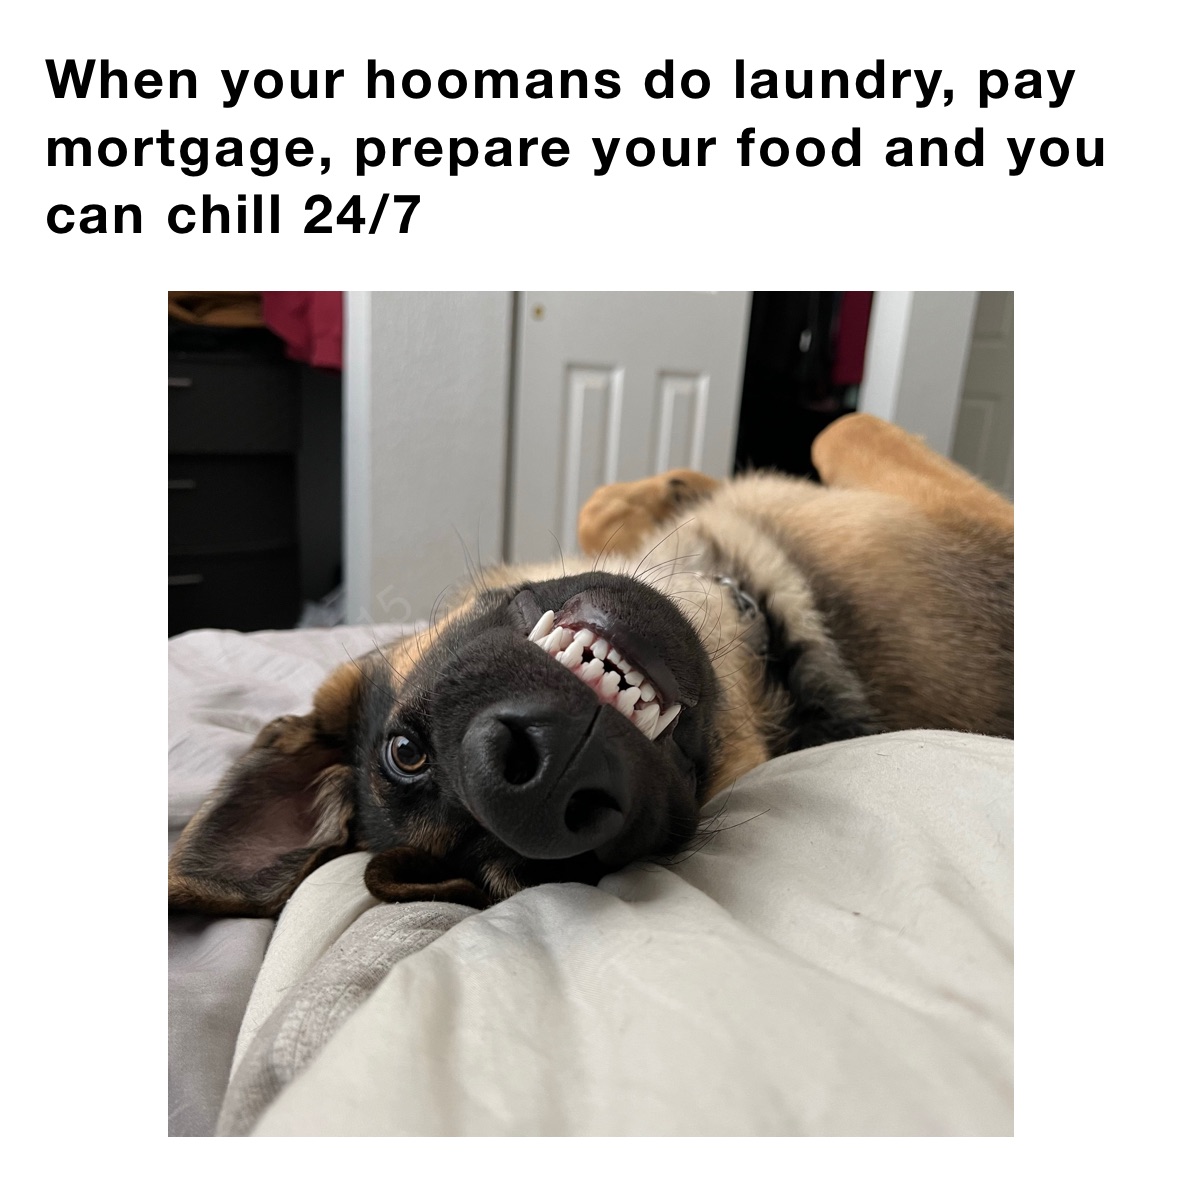 When your hoomans do laundry, pay mortgage, prepare your food and you can chill 24/7